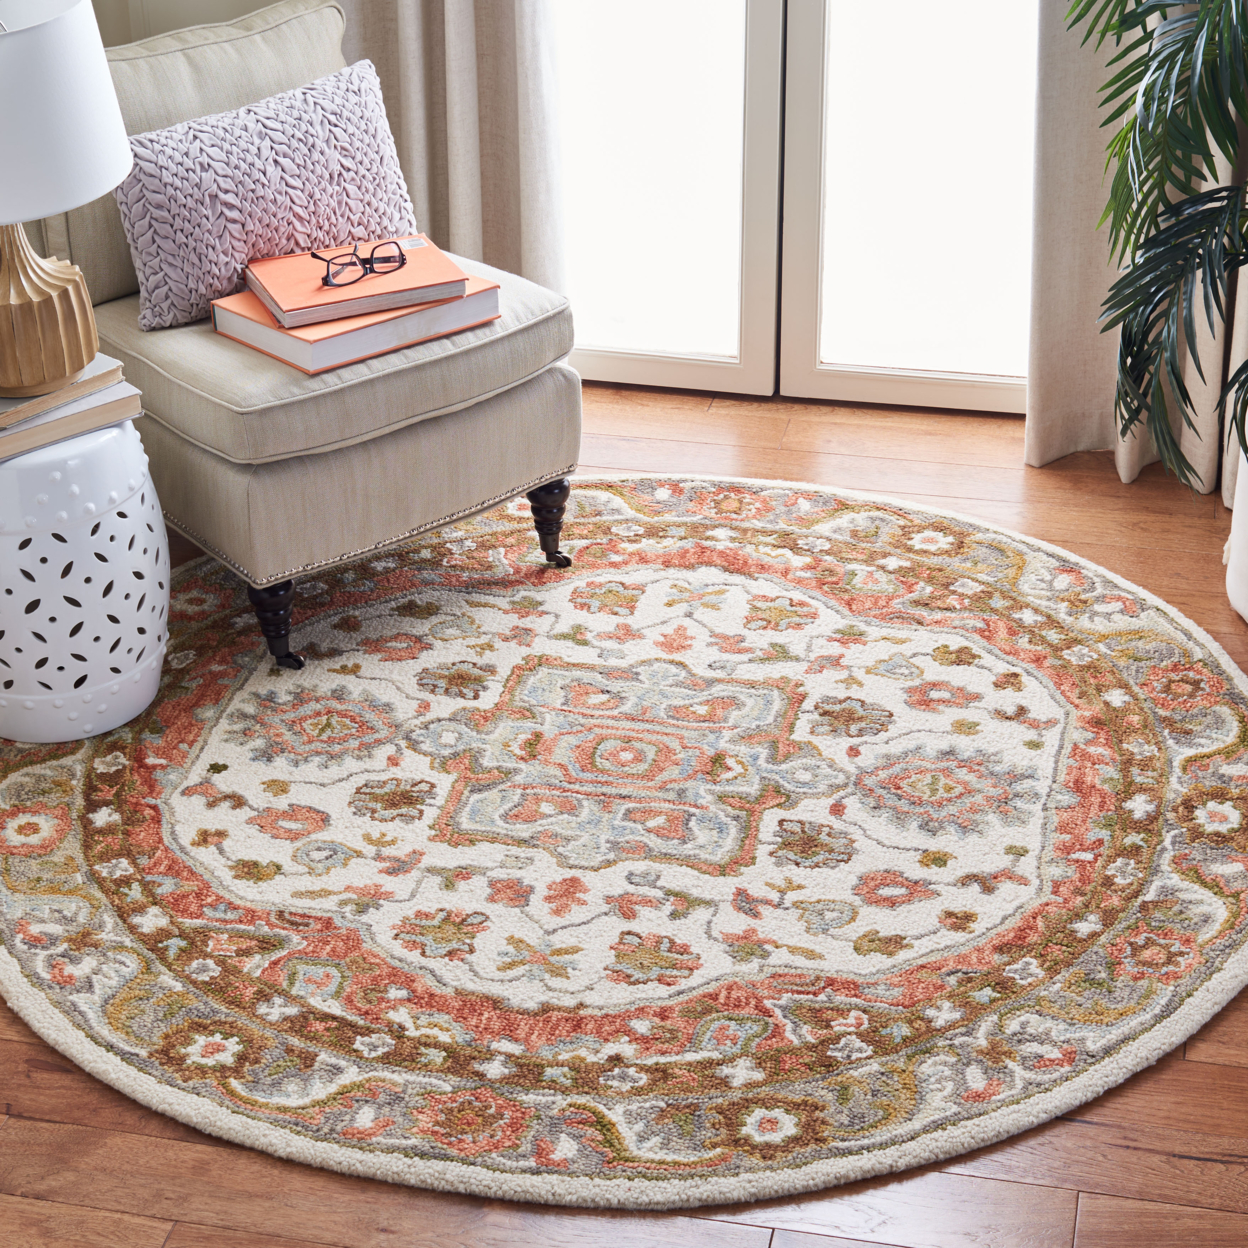 SAFAVIEH Trace Collection TRC523A Handmade Ivory/Red Rug - 6' Round